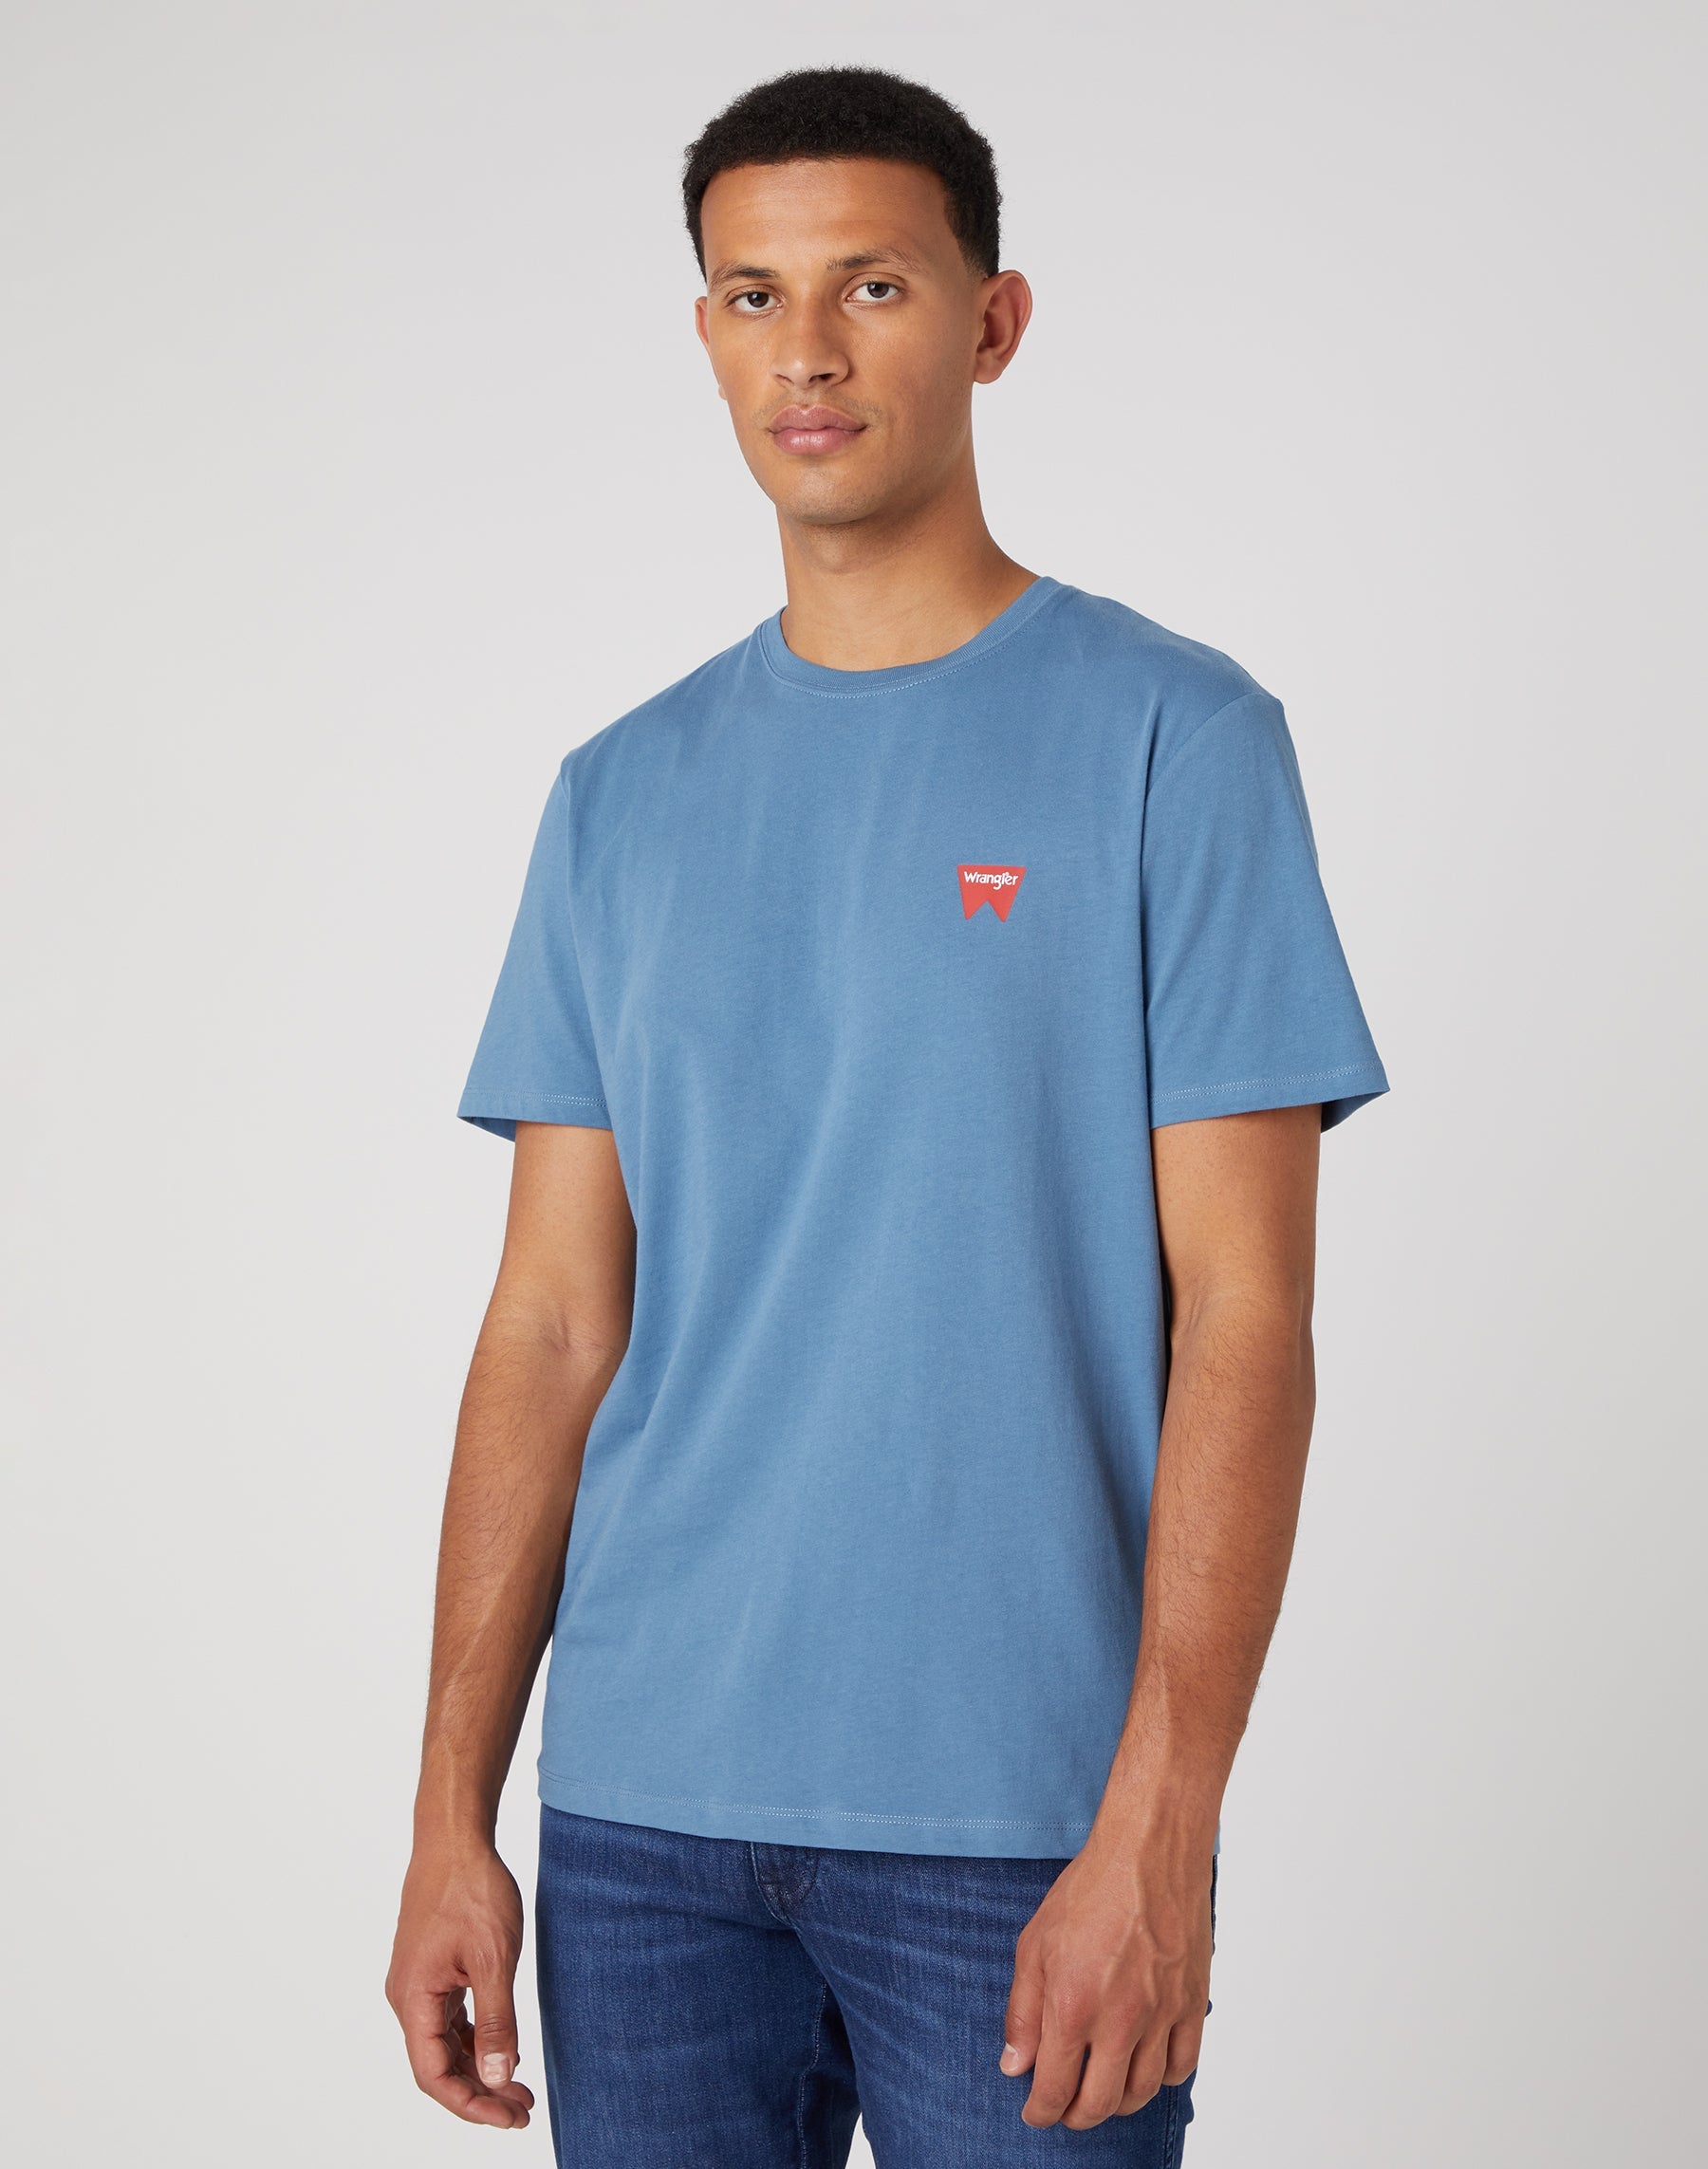 Sign Off Tee in Captains Blue T-Shirts Wrangler   